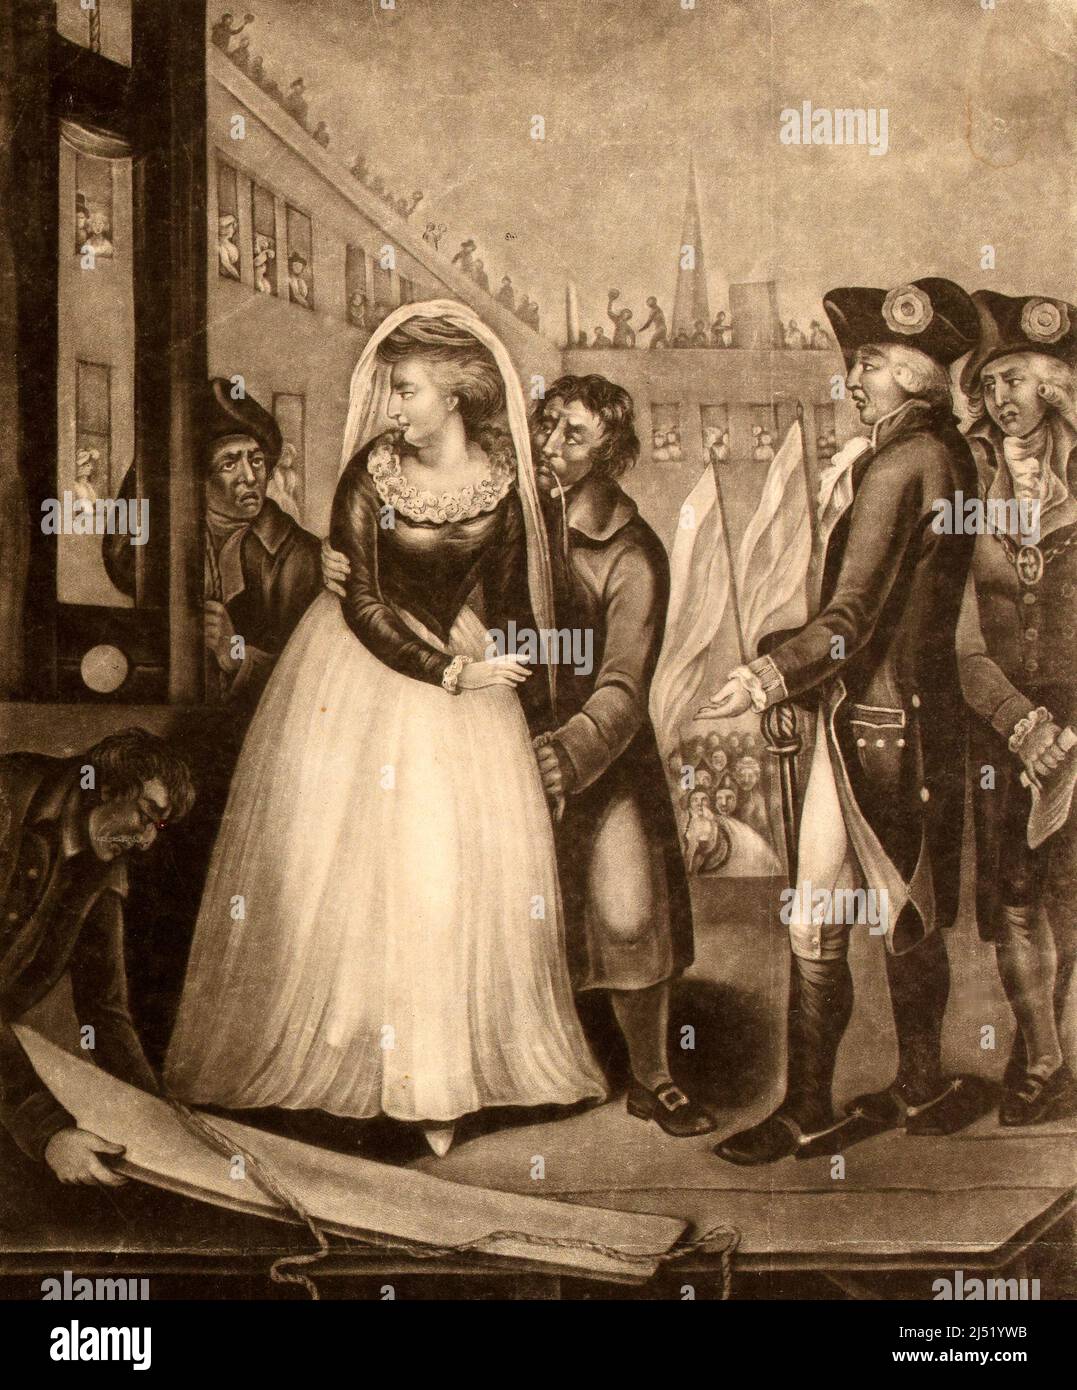 The Unfortunate Marie Antoinette Queen of France at the Place of Execution, October 16th 1793. Stock Photo